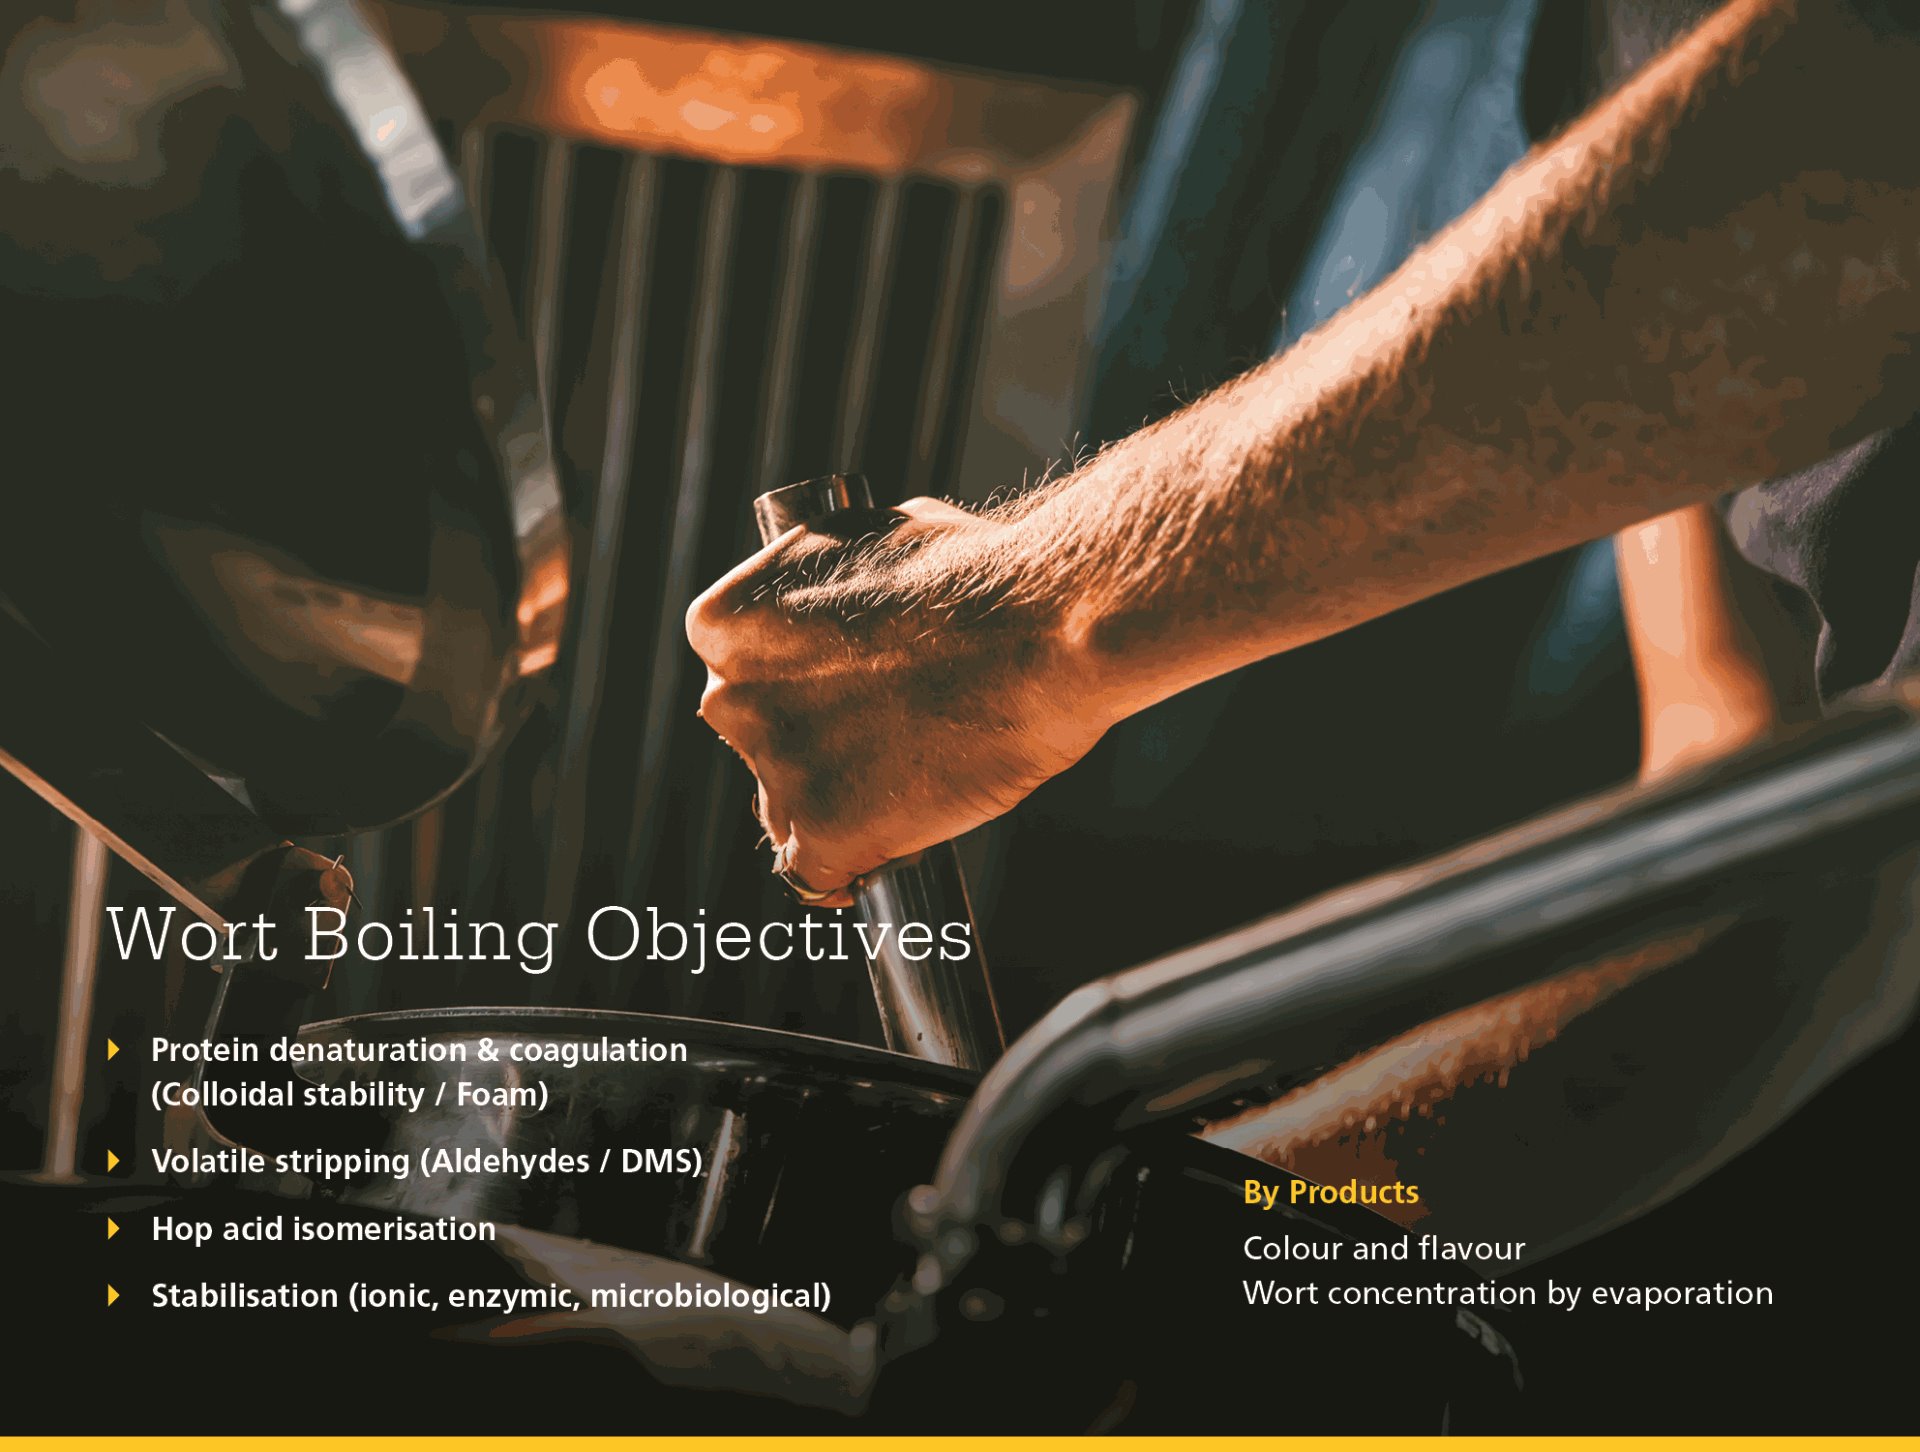 Wort boiling objectives graphic